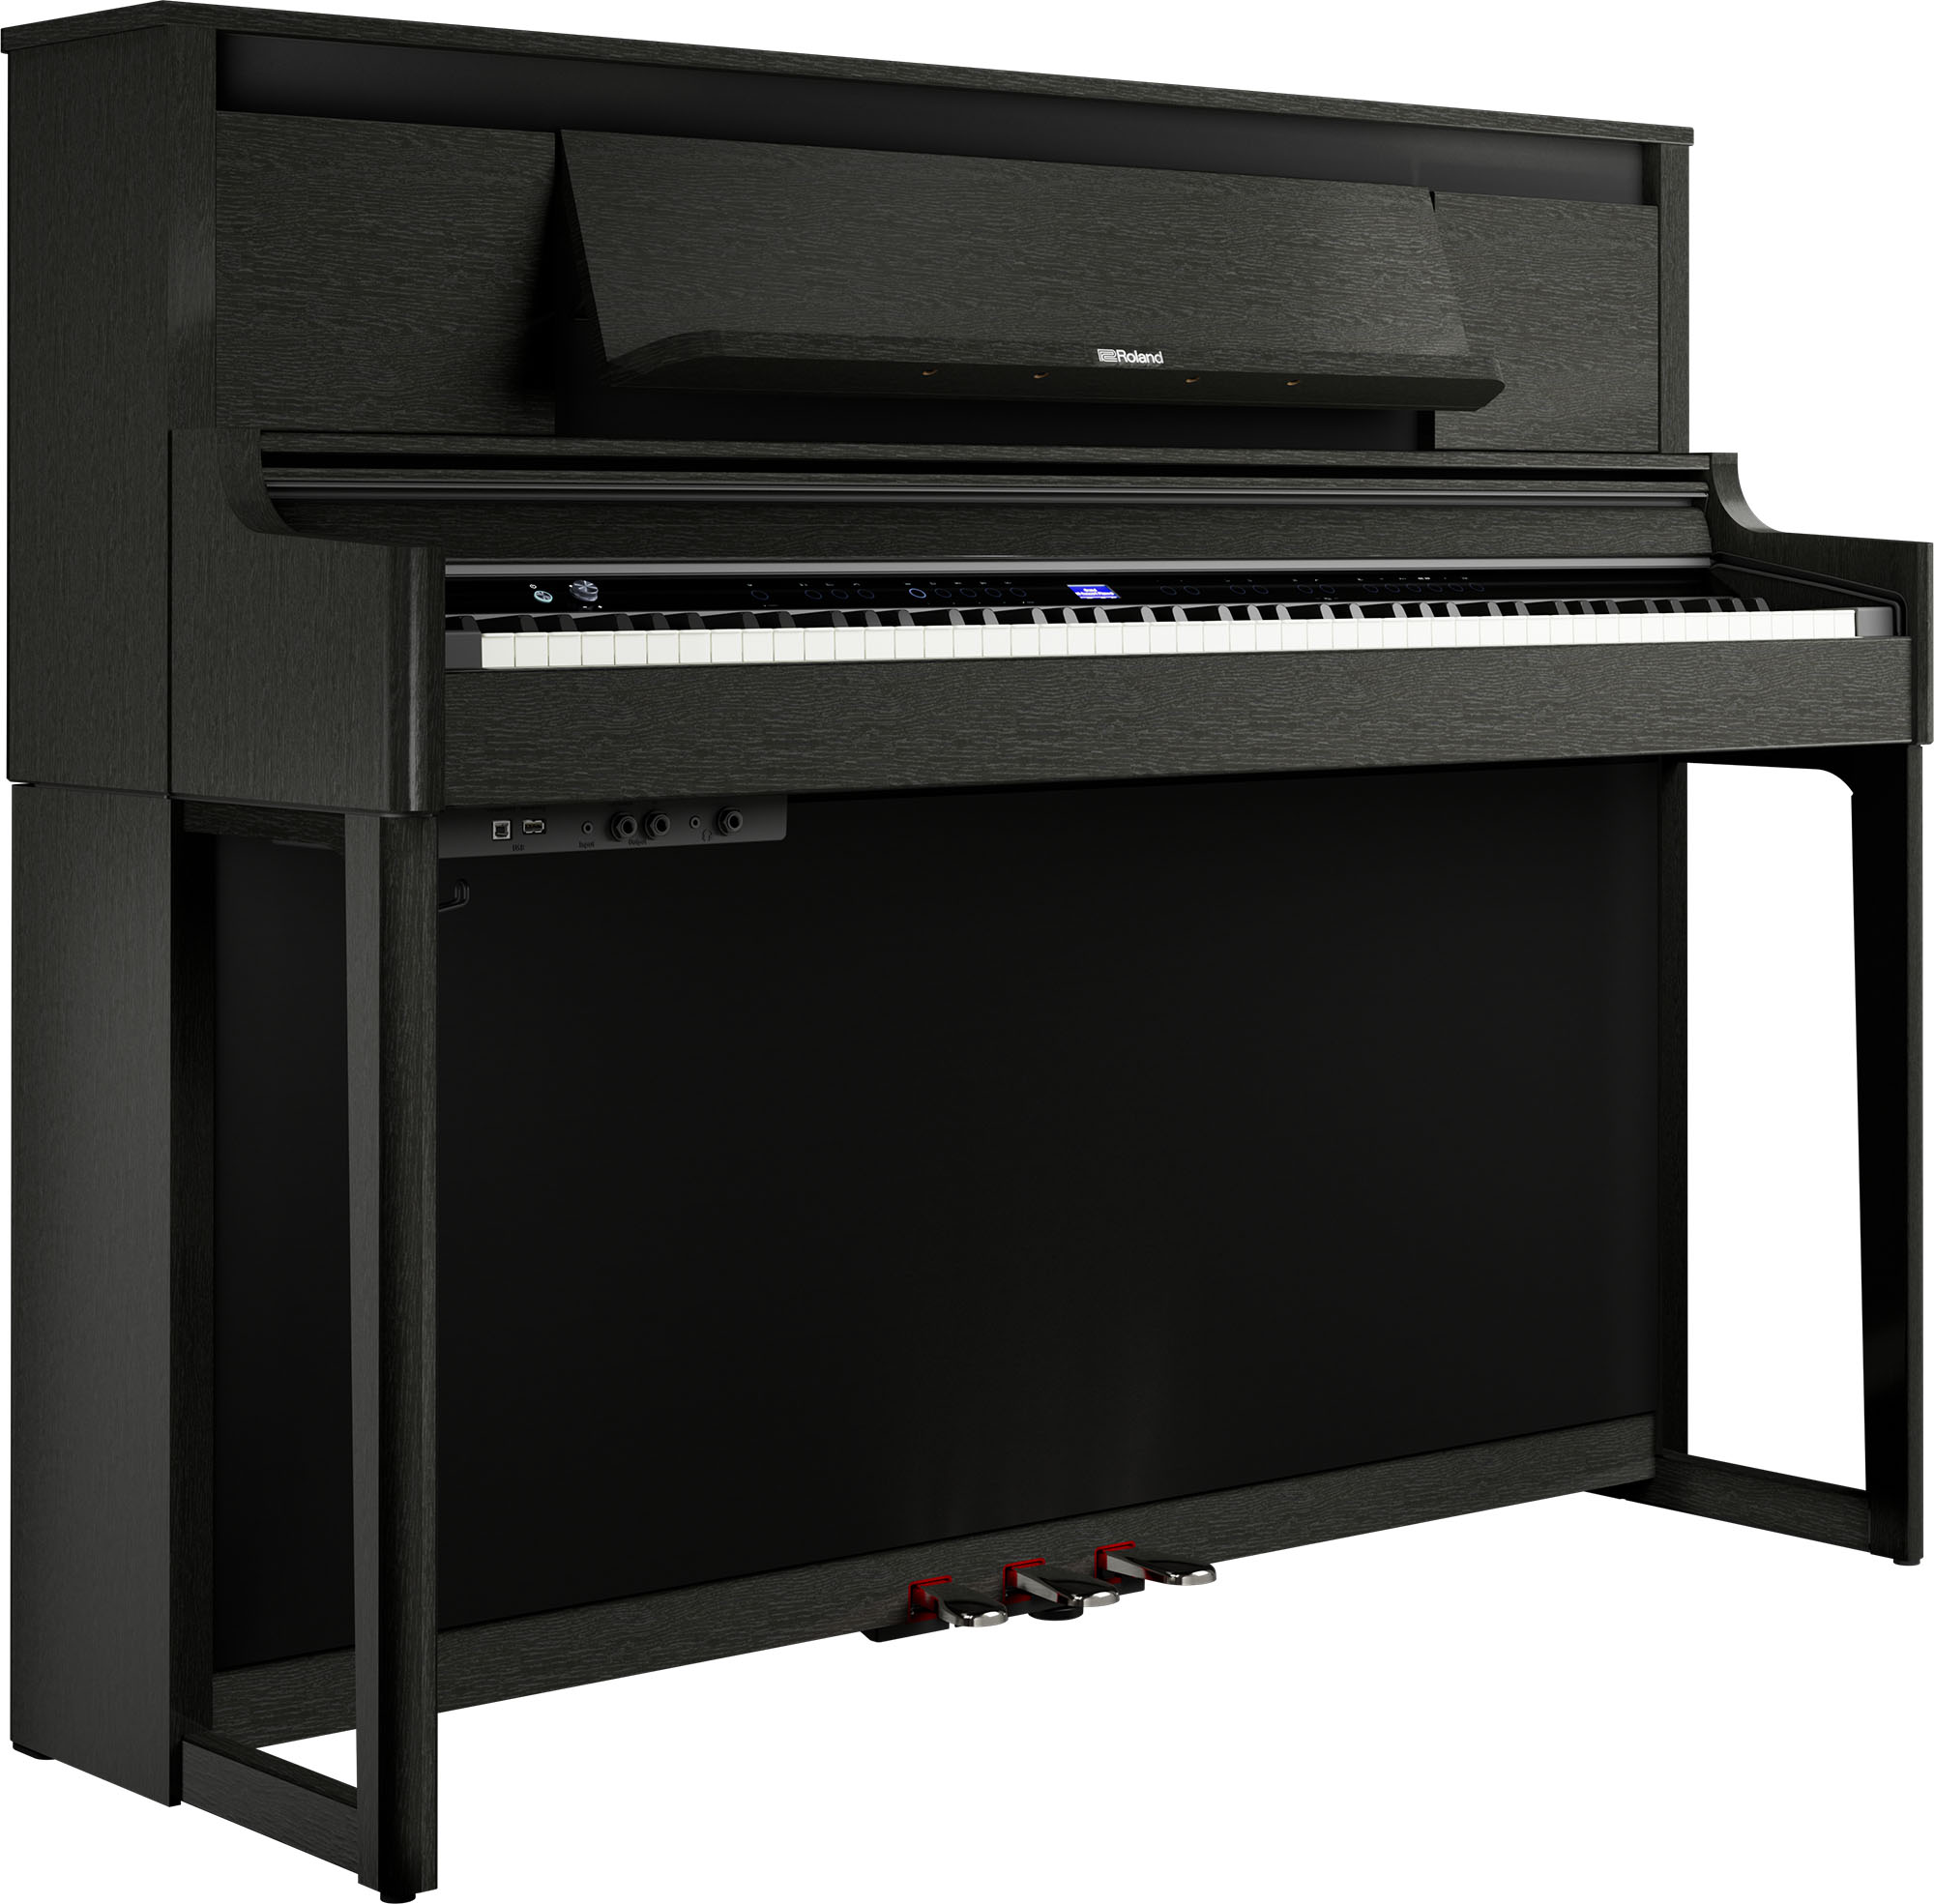 Roland Lx-6-ch - Charcoal Black - Piano digital con mueble - Variation 1